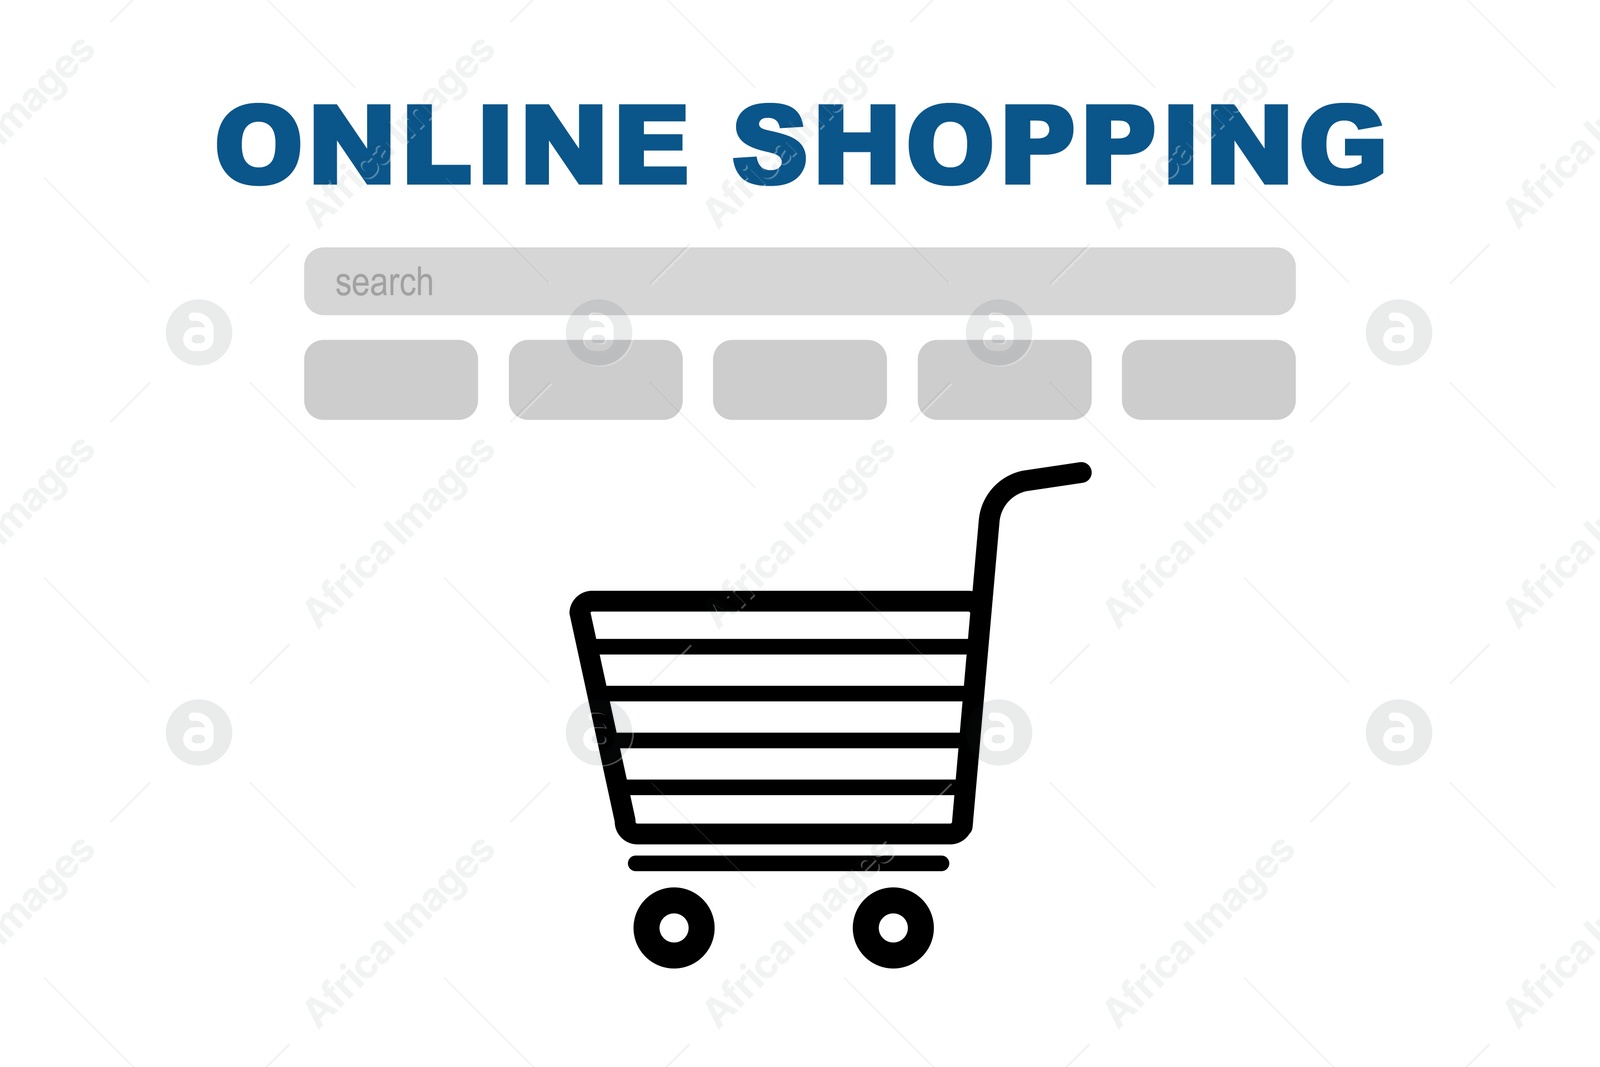 Illustration of Online shopping. Website interface with search bar and illustration of cart on white background